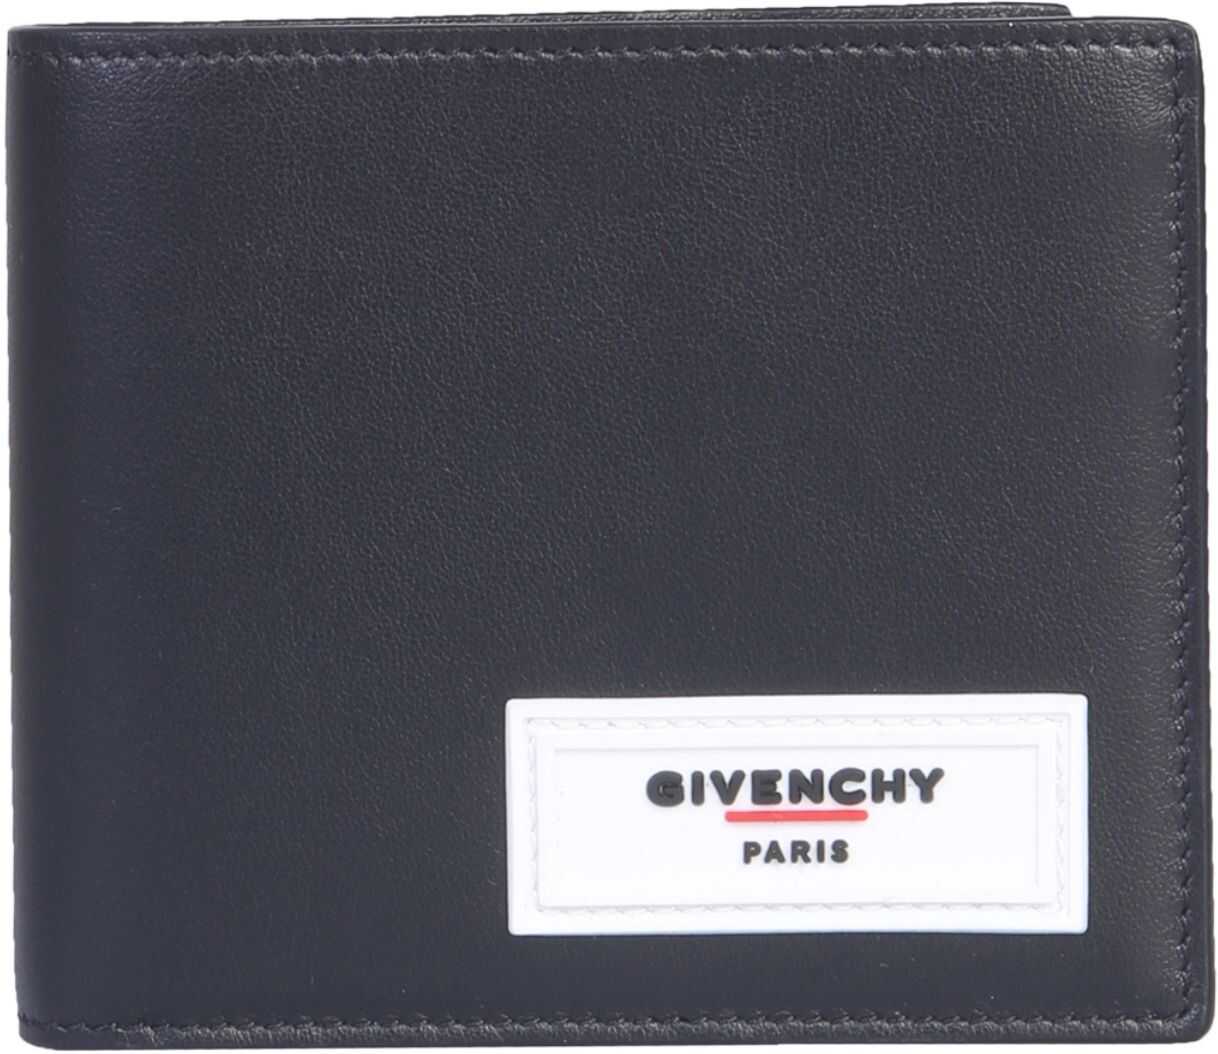 Givenchy Bifold Wallet BLACK